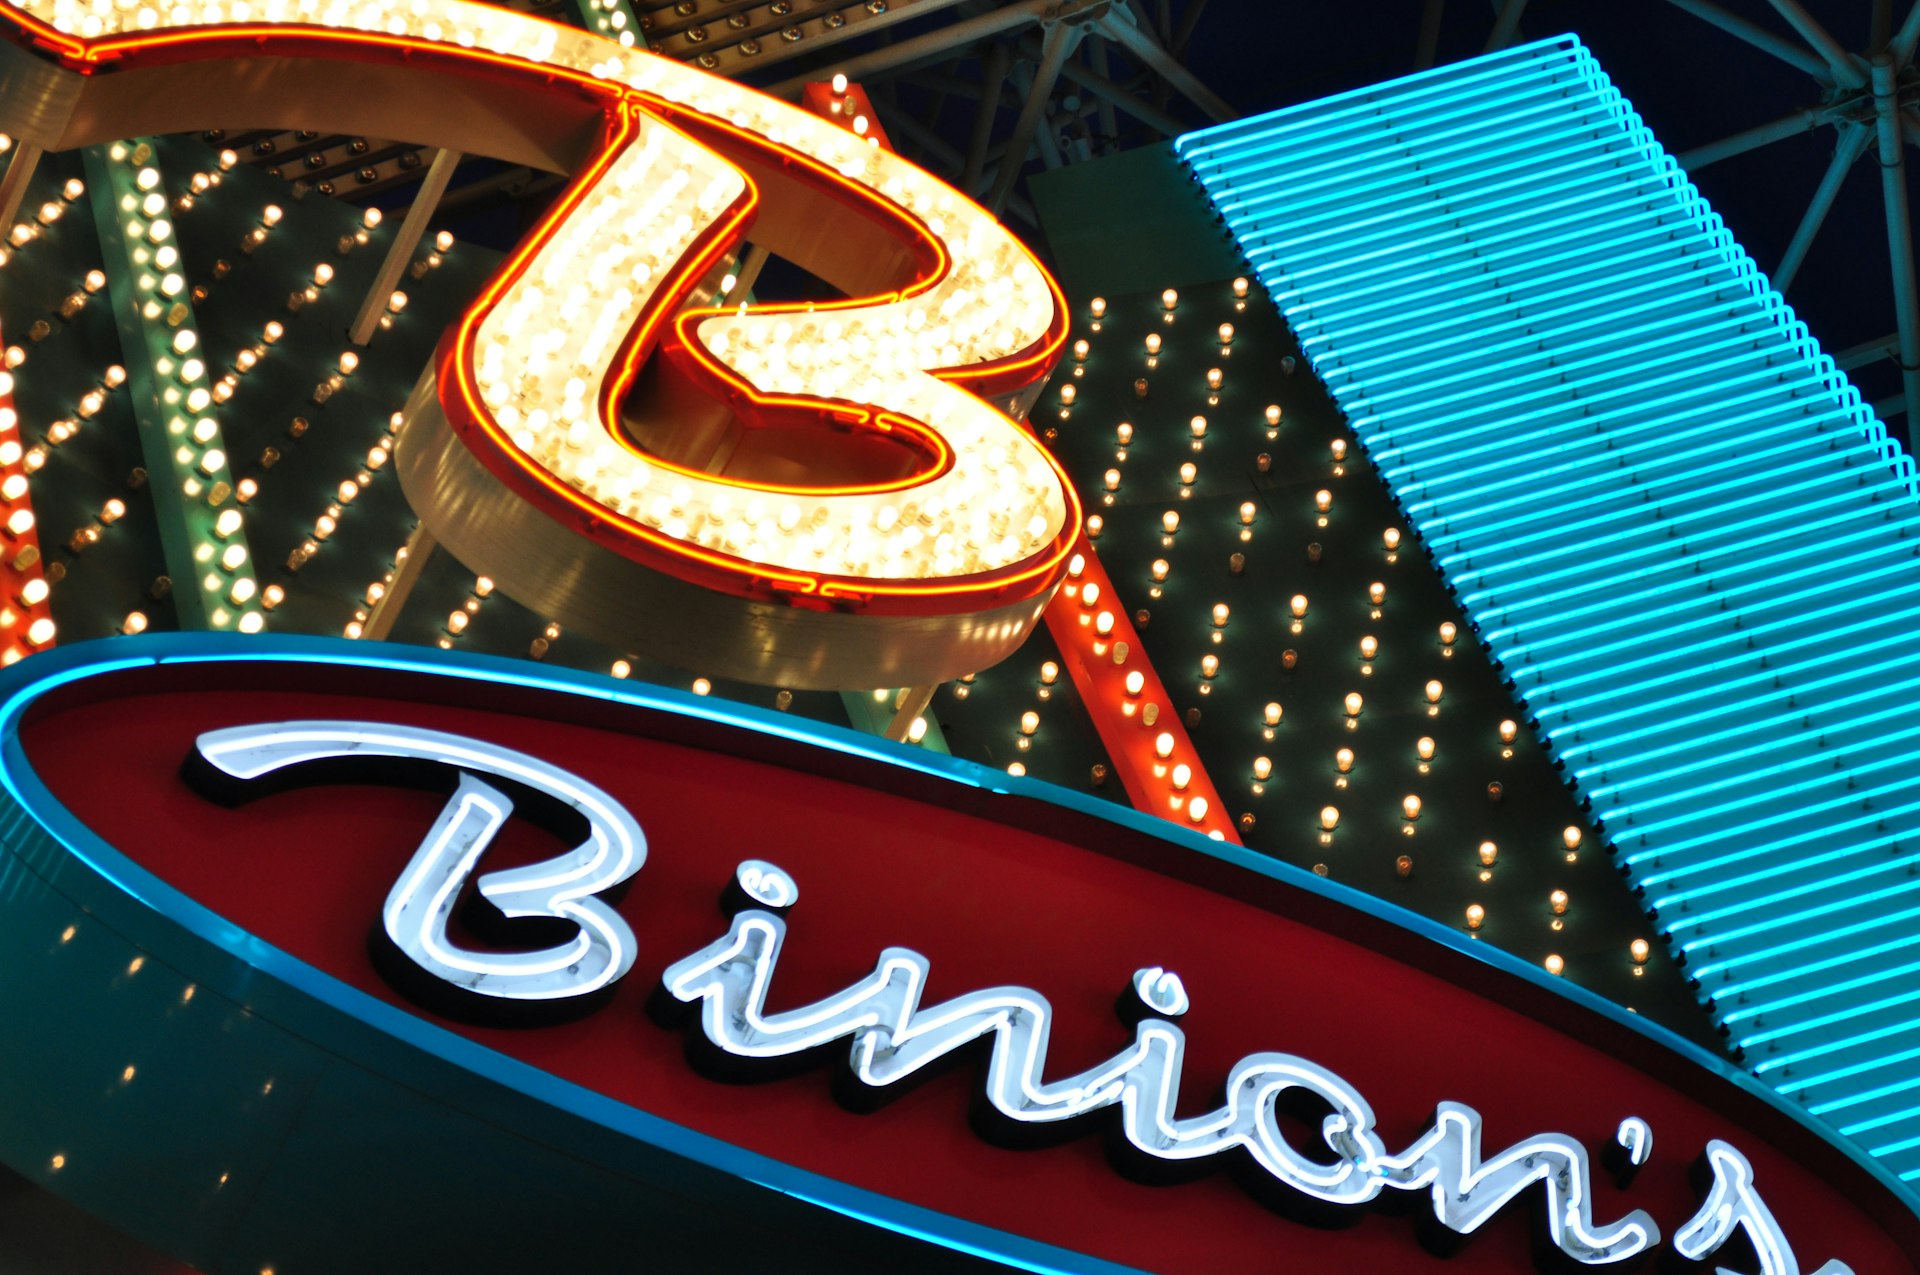 Binion's famous glittering marquee on Fremont St. Image by Roxanne Ready / CC BY-SA 2.0